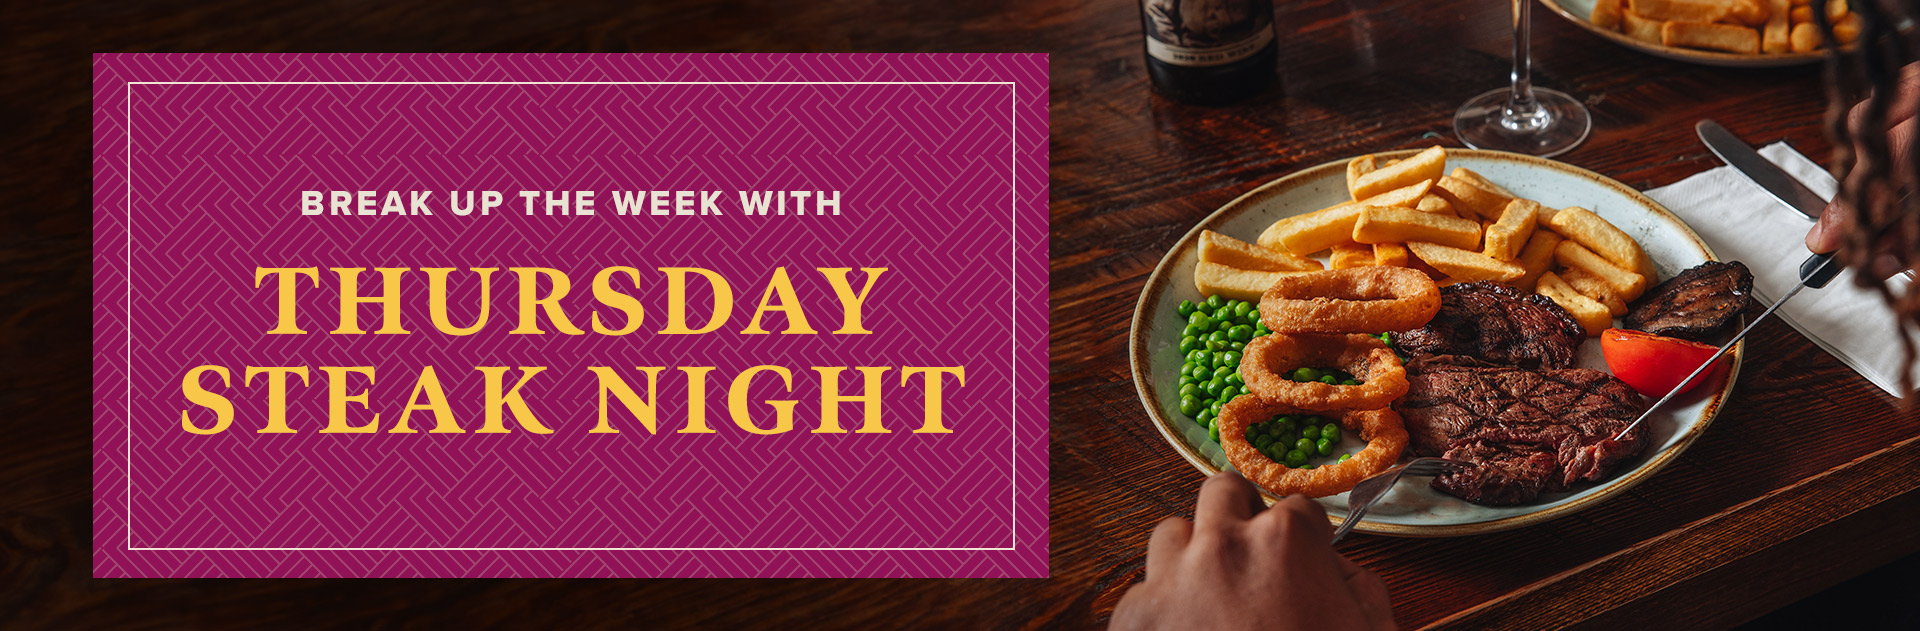 Thursday Steak Night at The Queen Adelaide